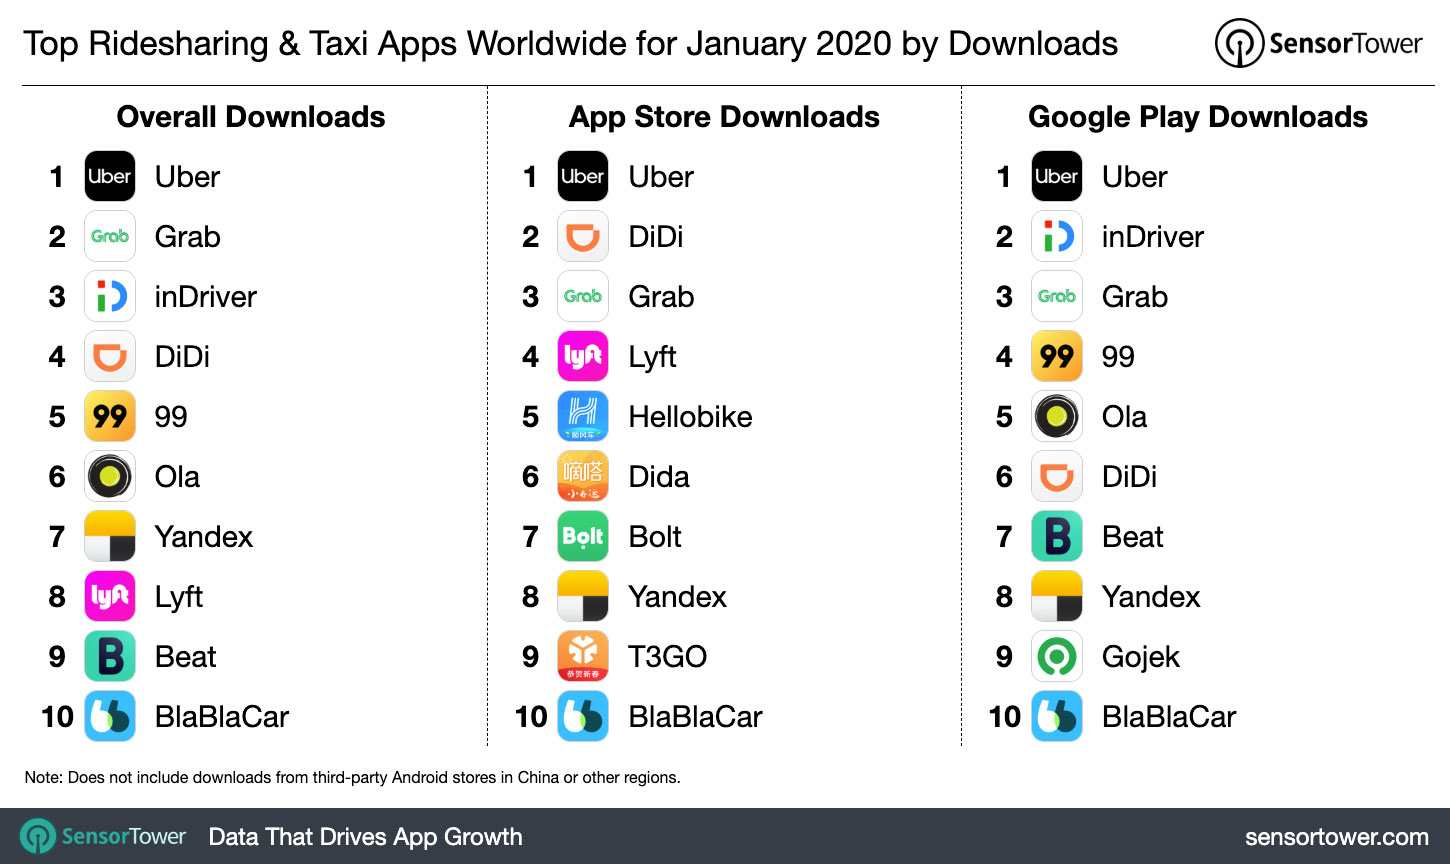 Top Ridesharing & Taxi Apps Worldwide for January 2020 by Downloads